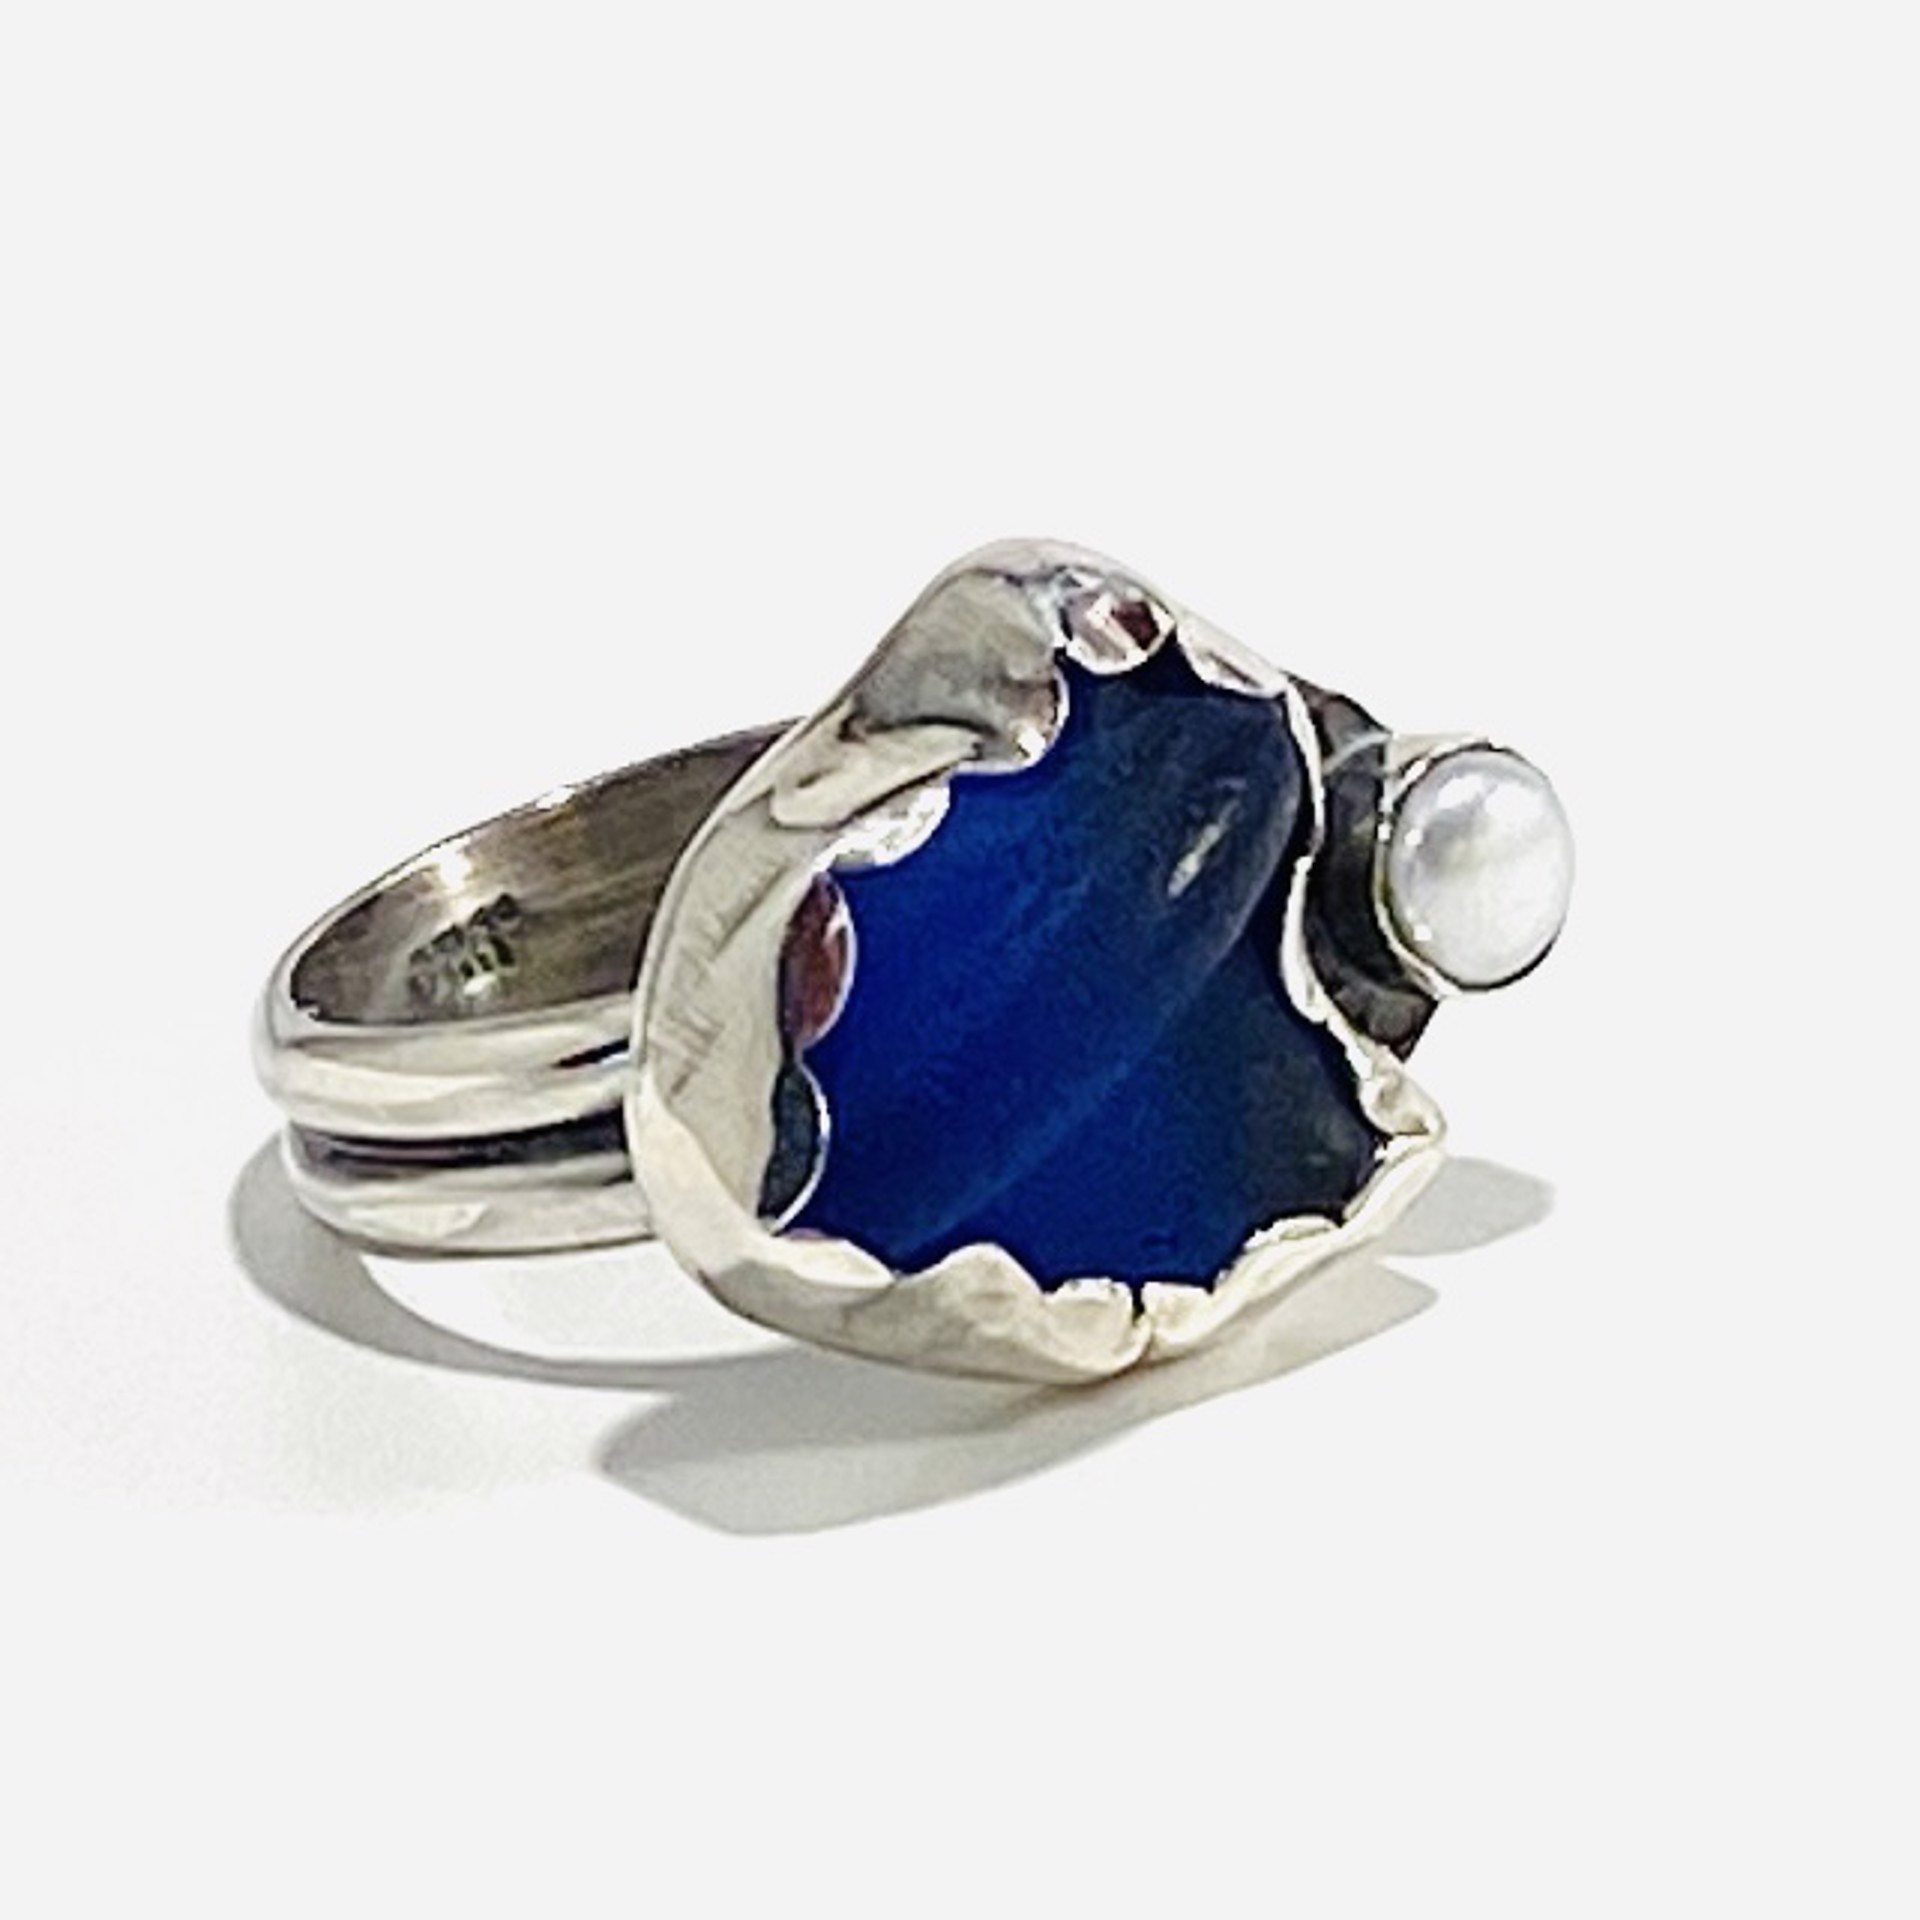 AB23-13 Dark Blue Sea Glass Pearl Accent Ring sz8 by Anne Bivens